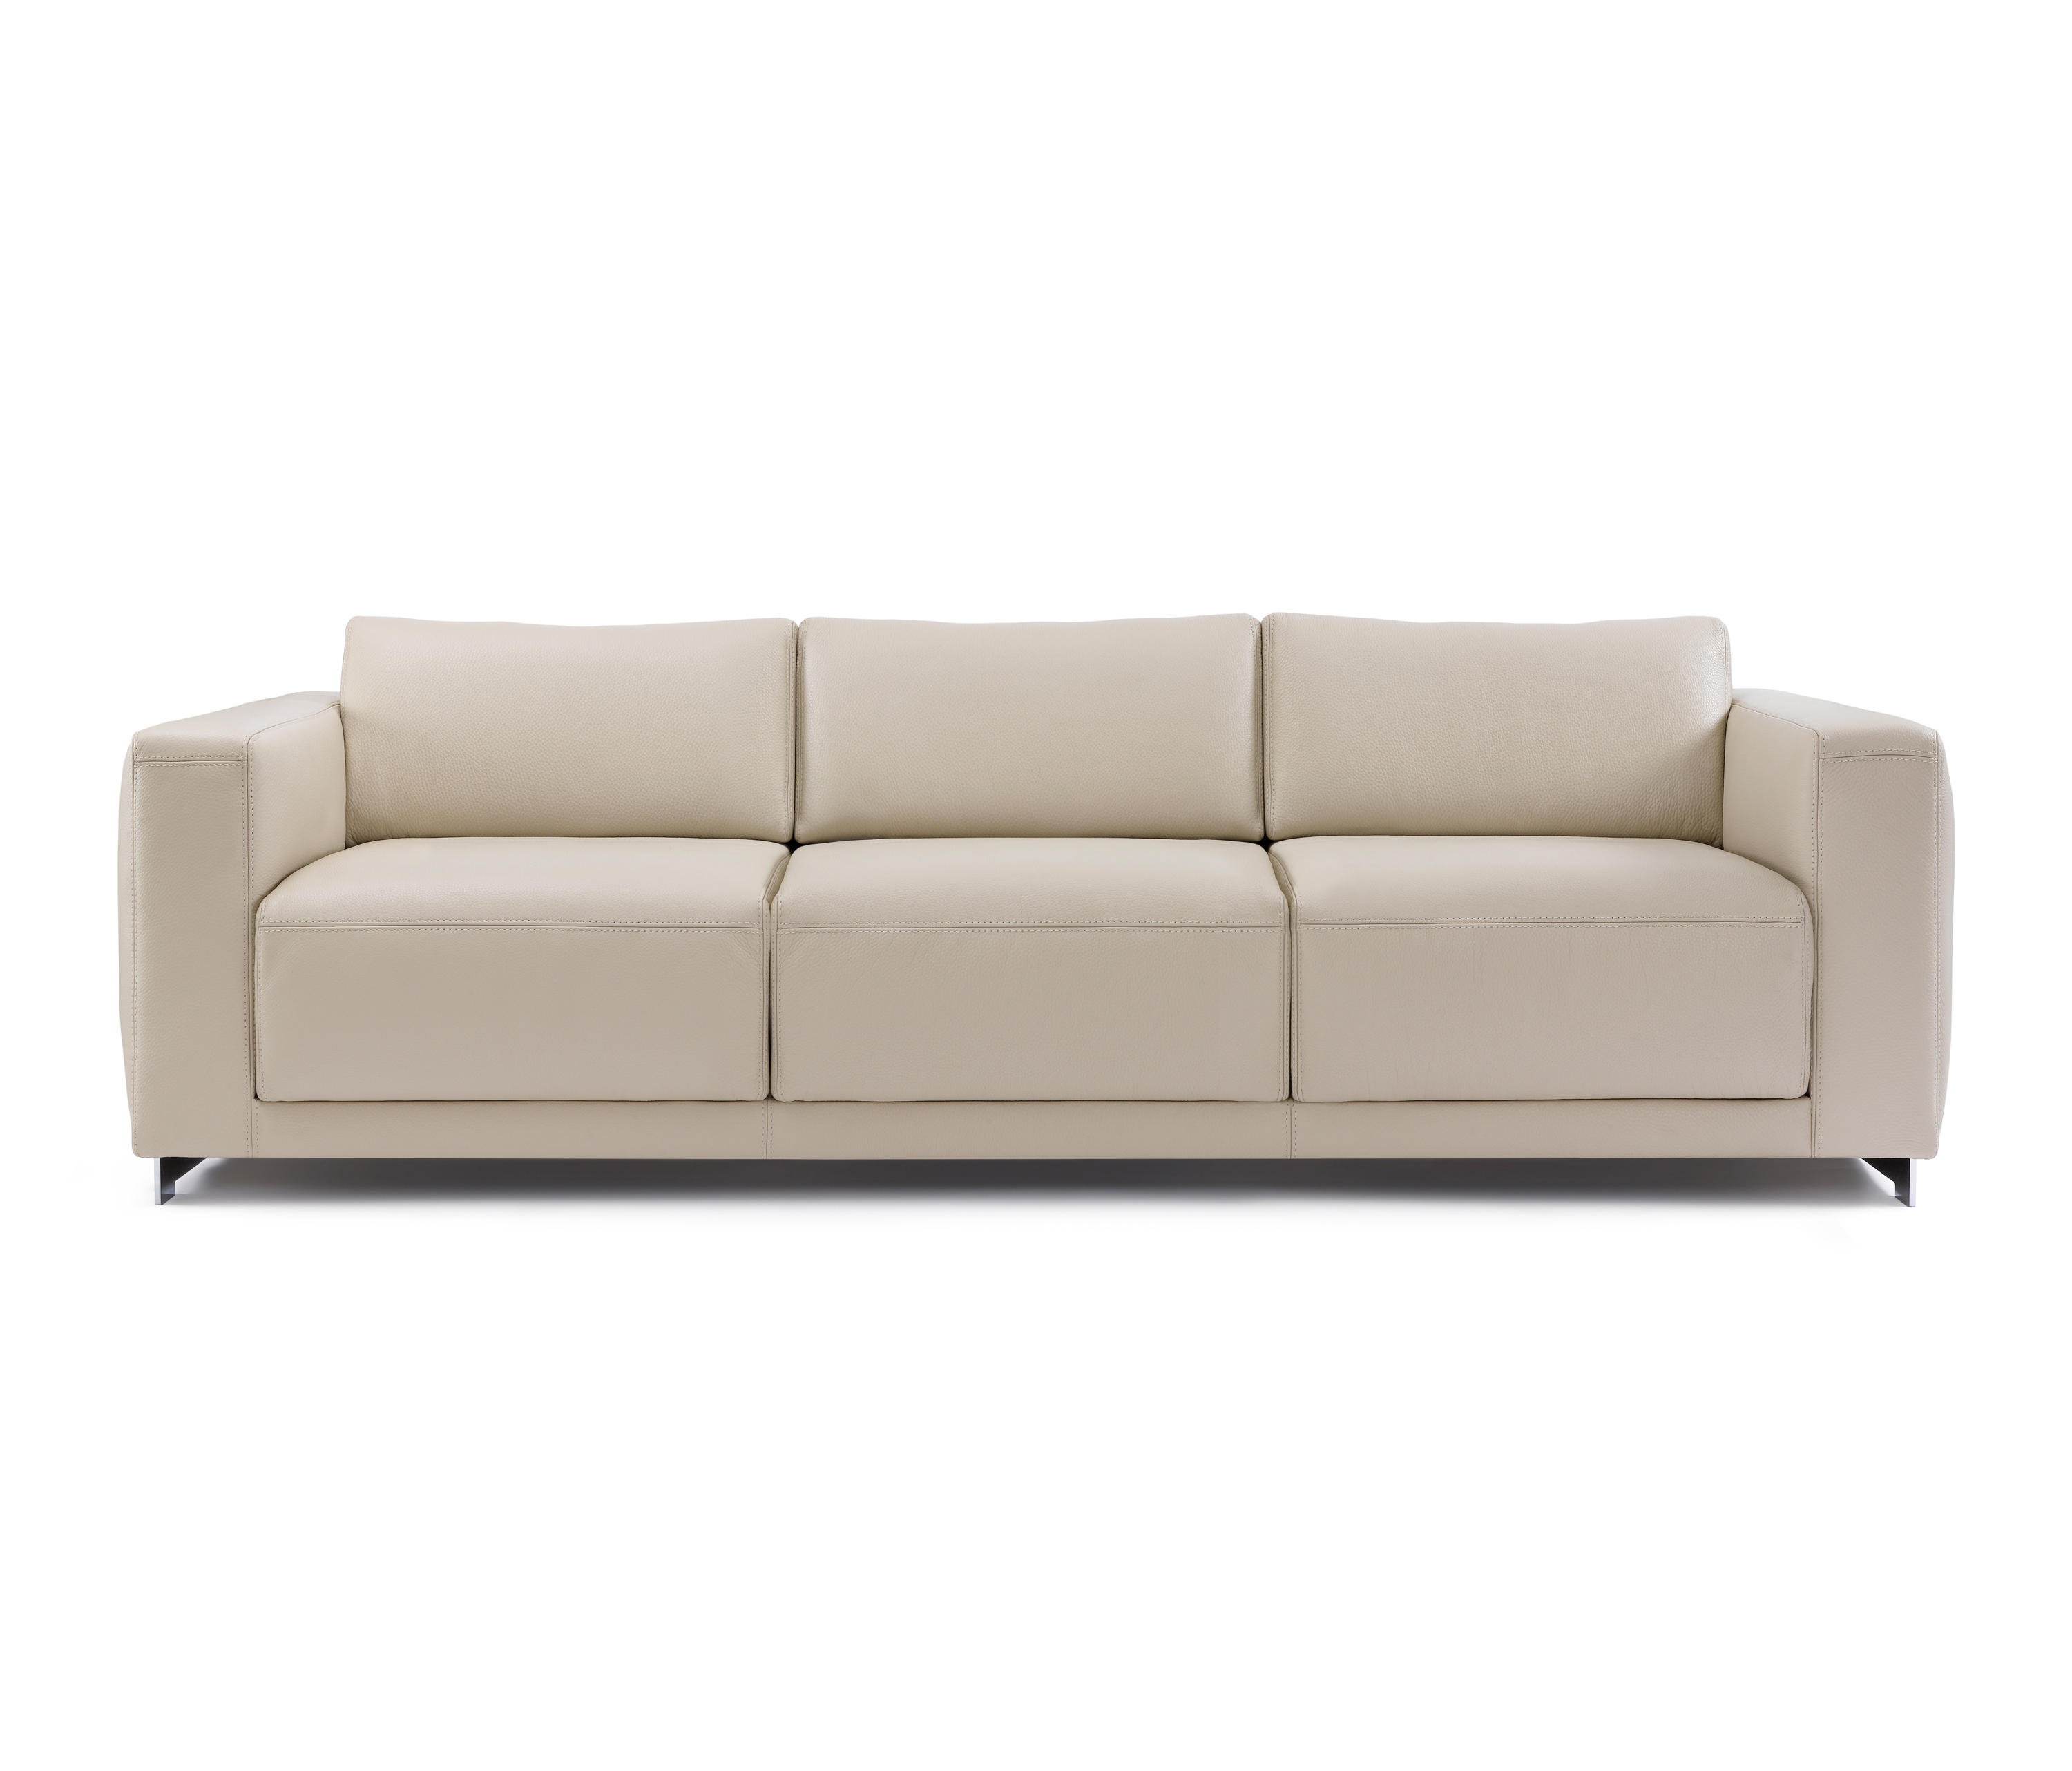 LONG ISLAND - Sofas from Durlet | Architonic